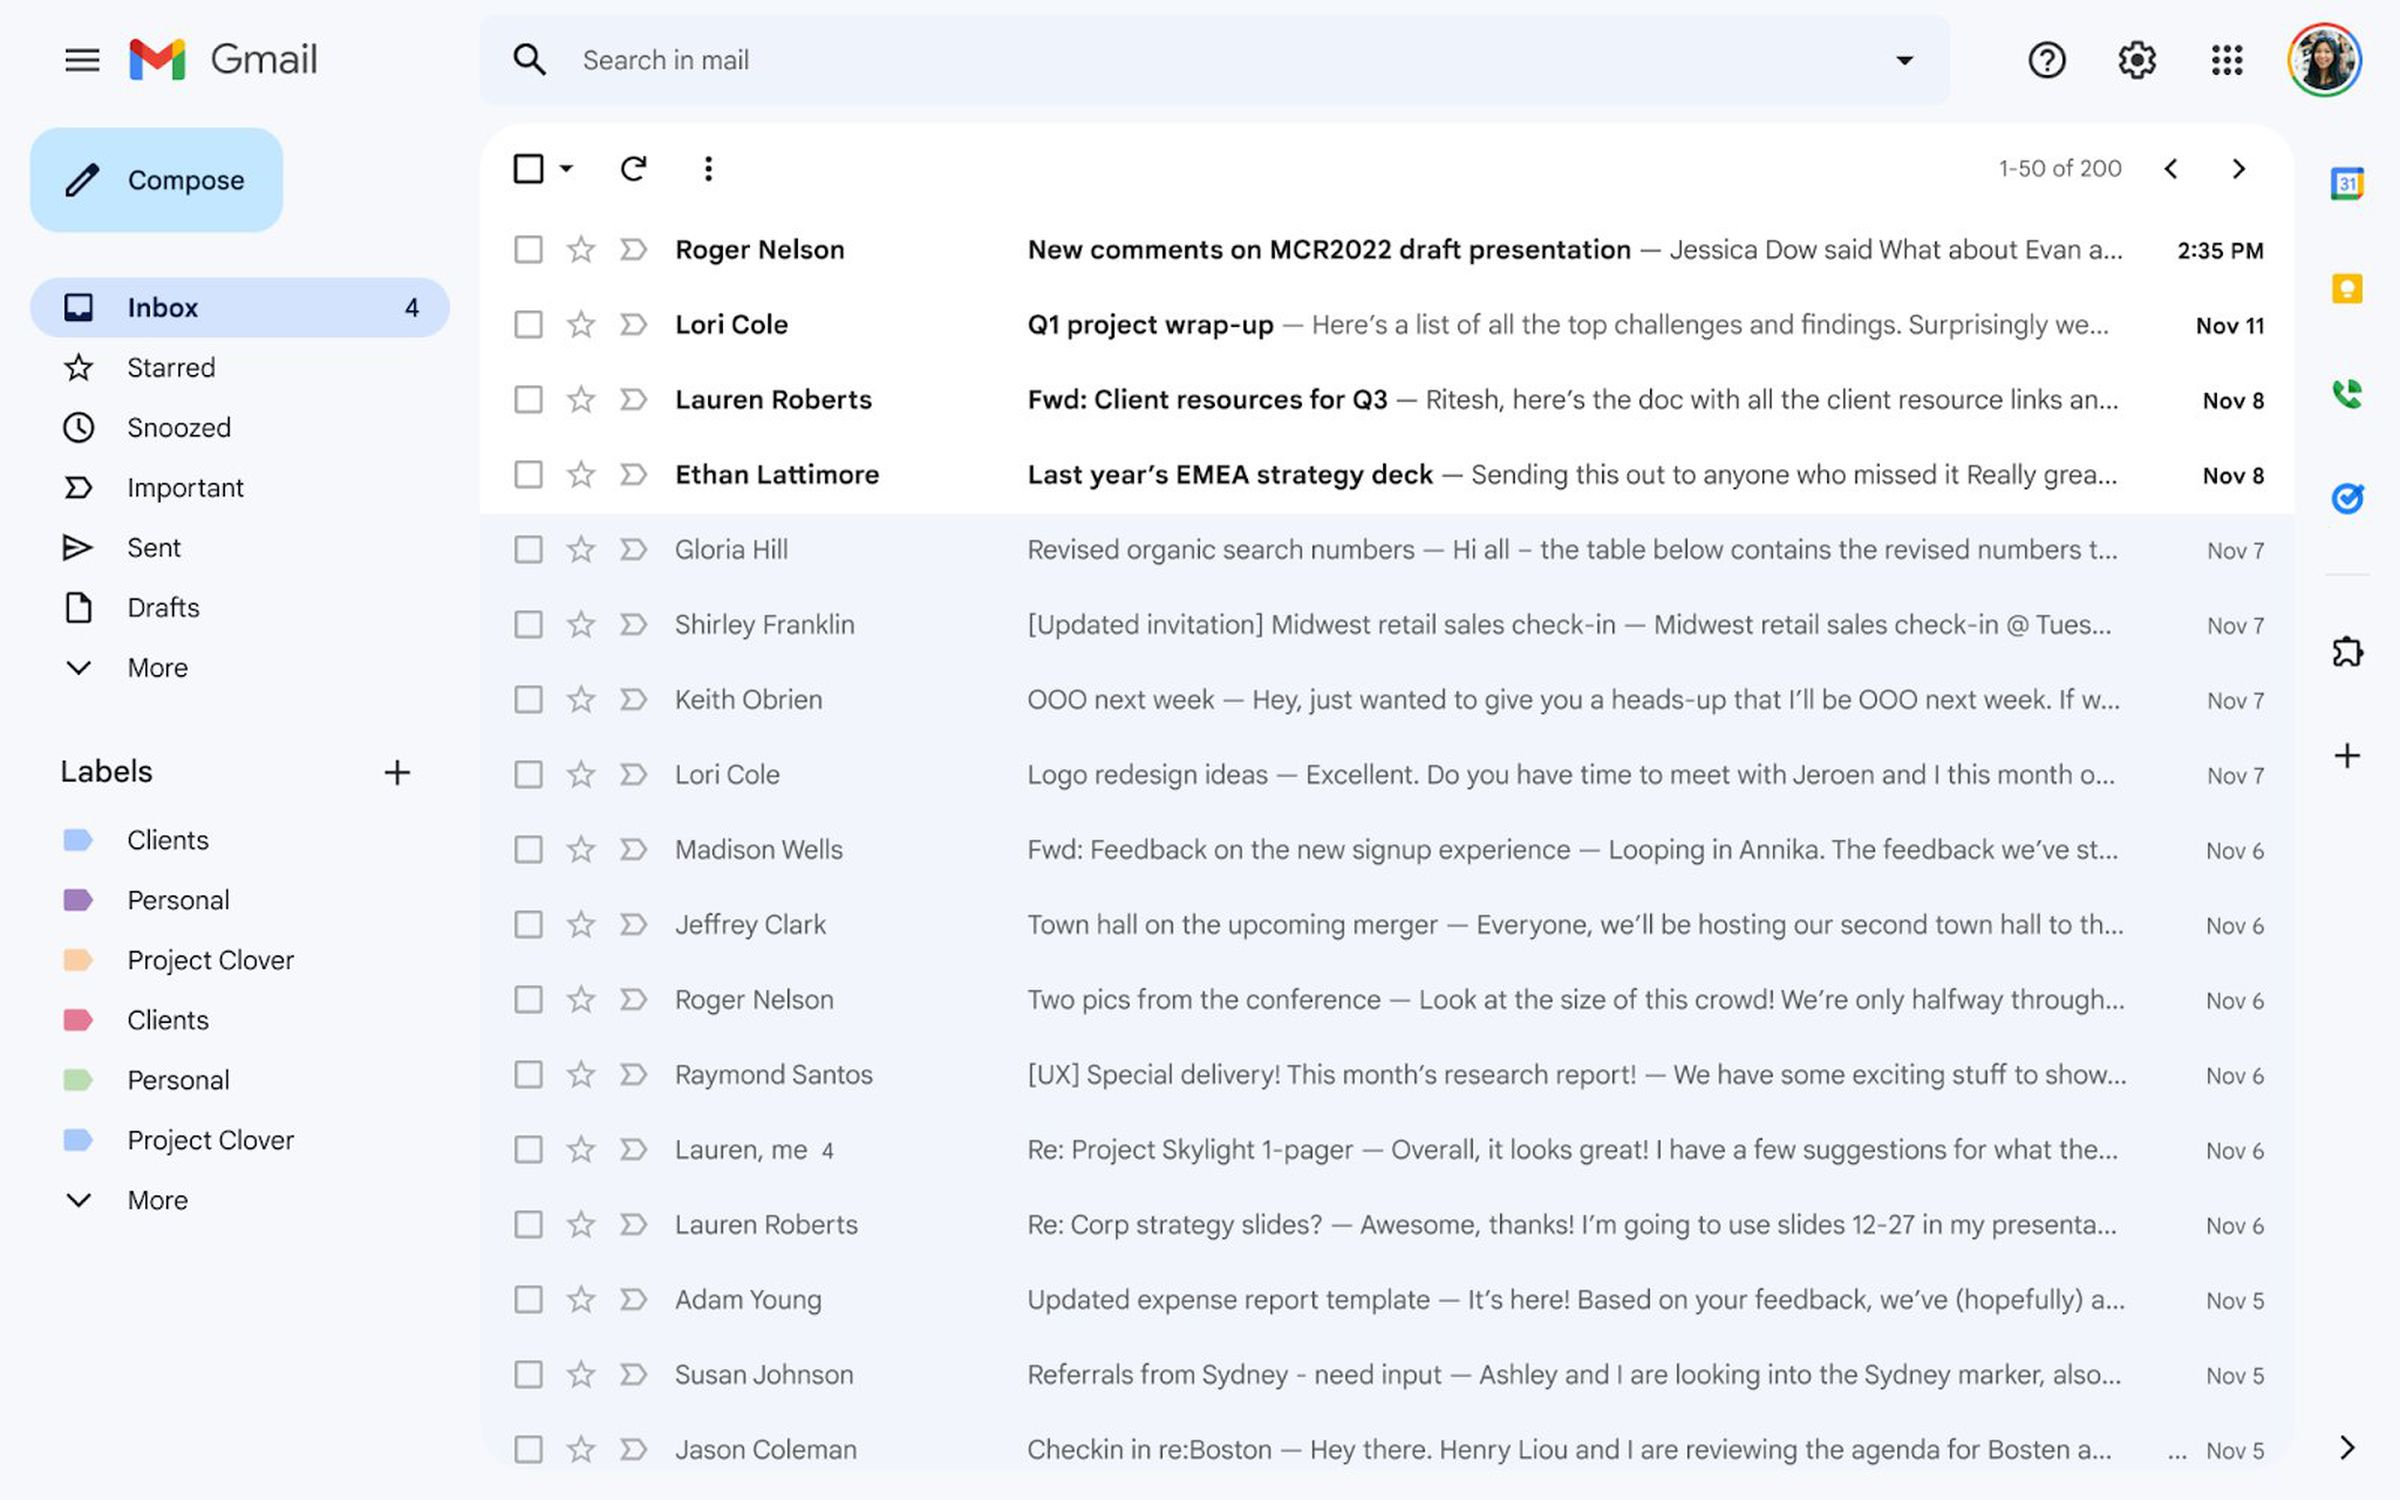 Gmail’s new UI, with just Gmail and the other apps disabled